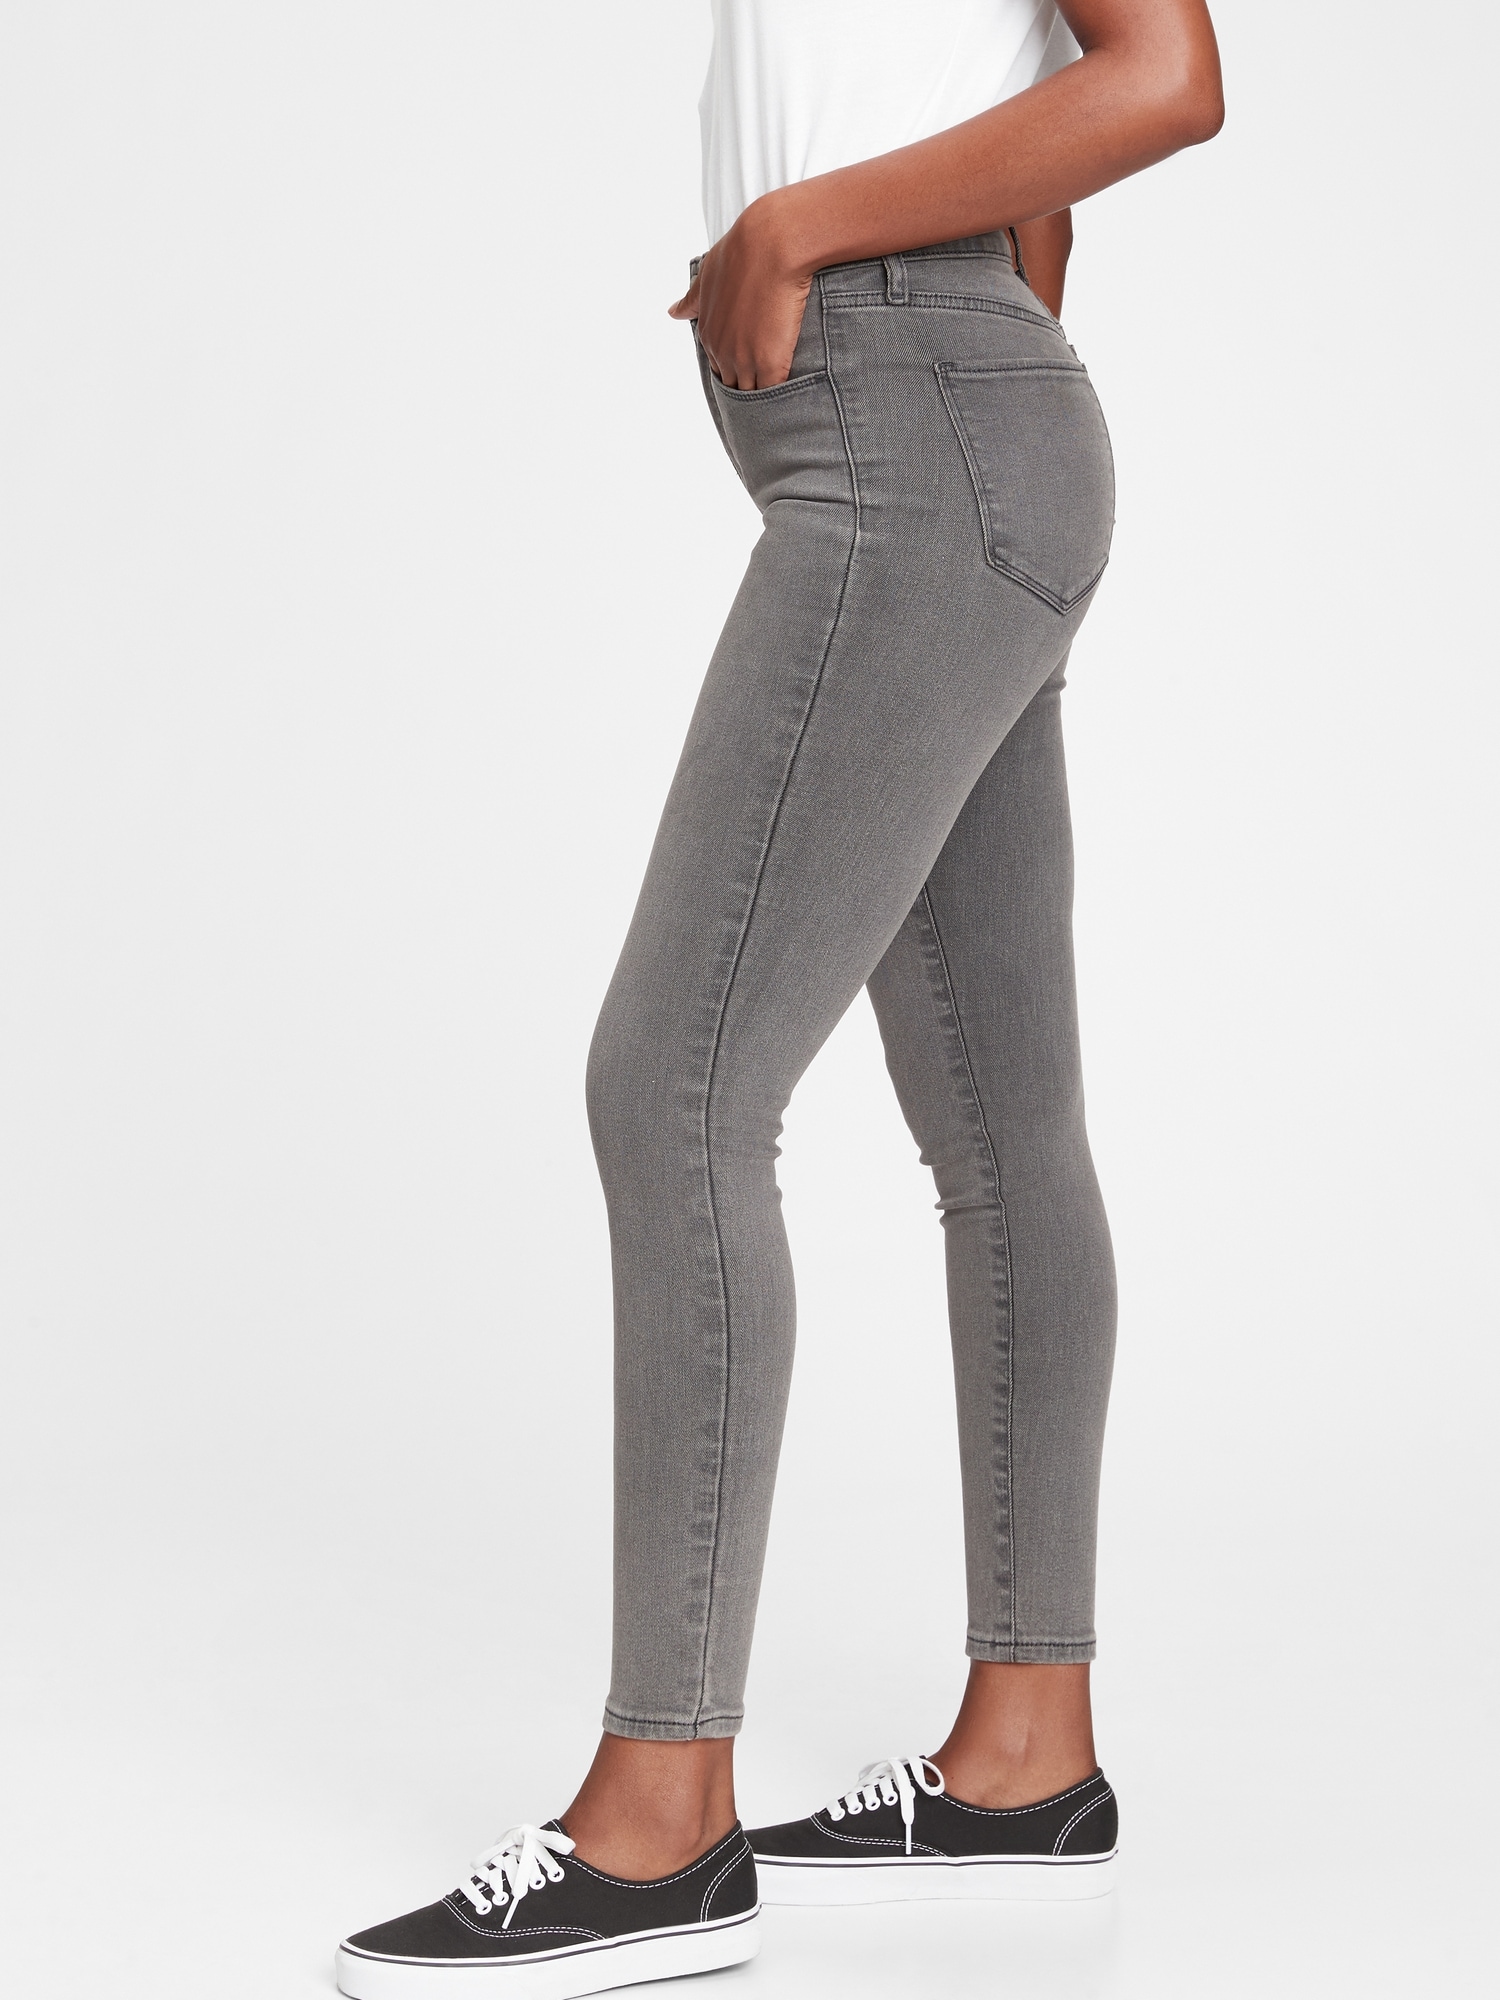 Buy Gap High Rise Universal Jegging from the Gap online shop